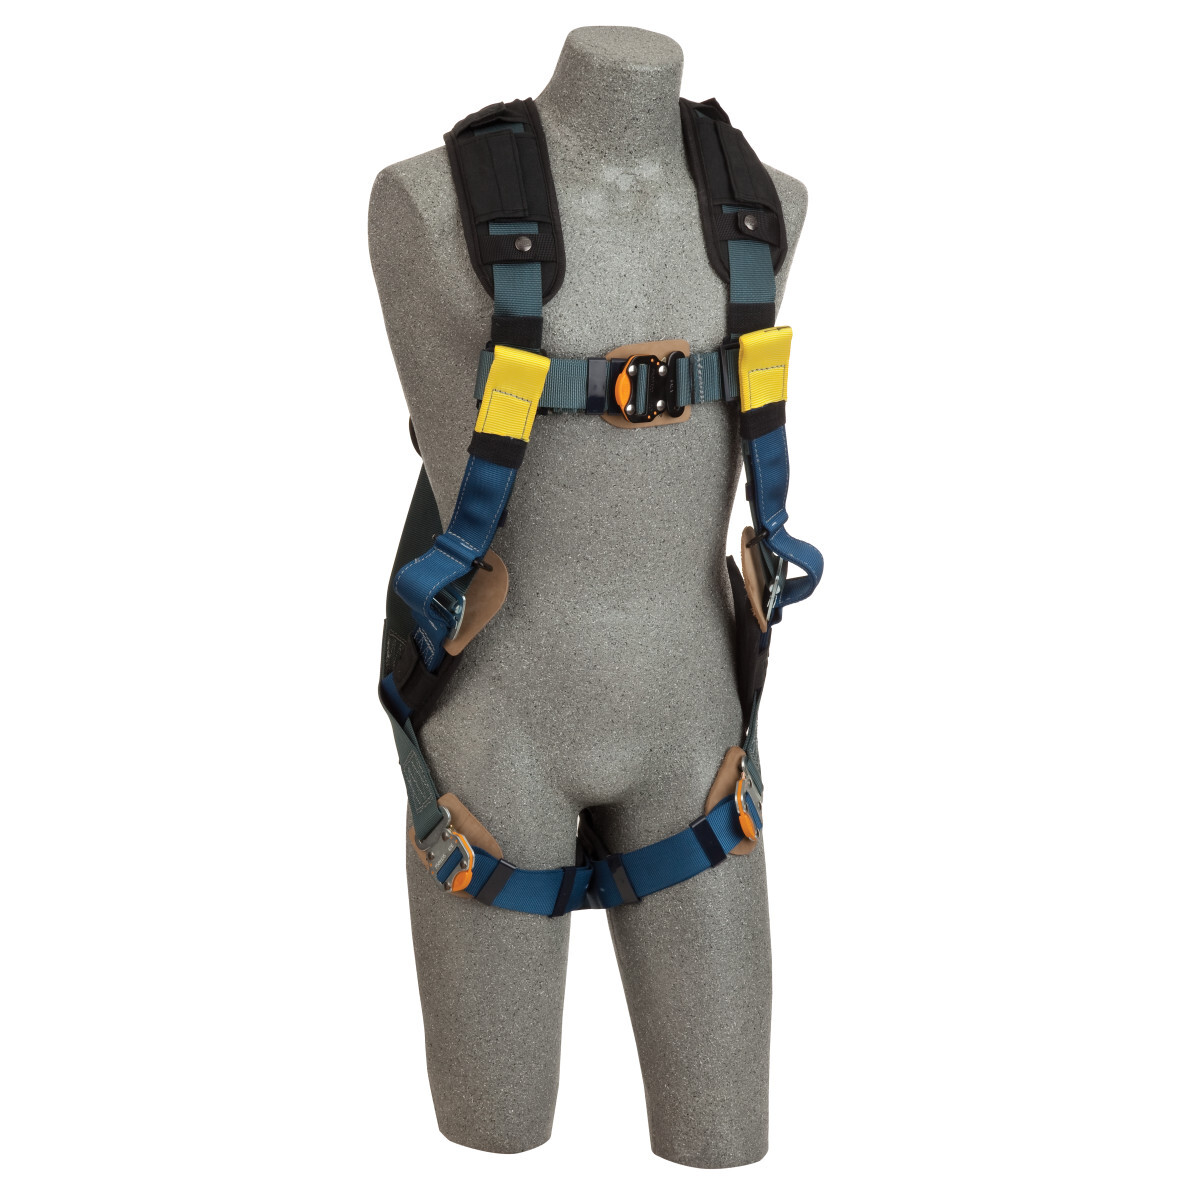 3M™ DBI-SALA® Large ExoFit™ XP Arc Flash Full Body/Vest Style Harness With Back D-Ring, Web Rescue Loops, Quick Connect Chest An